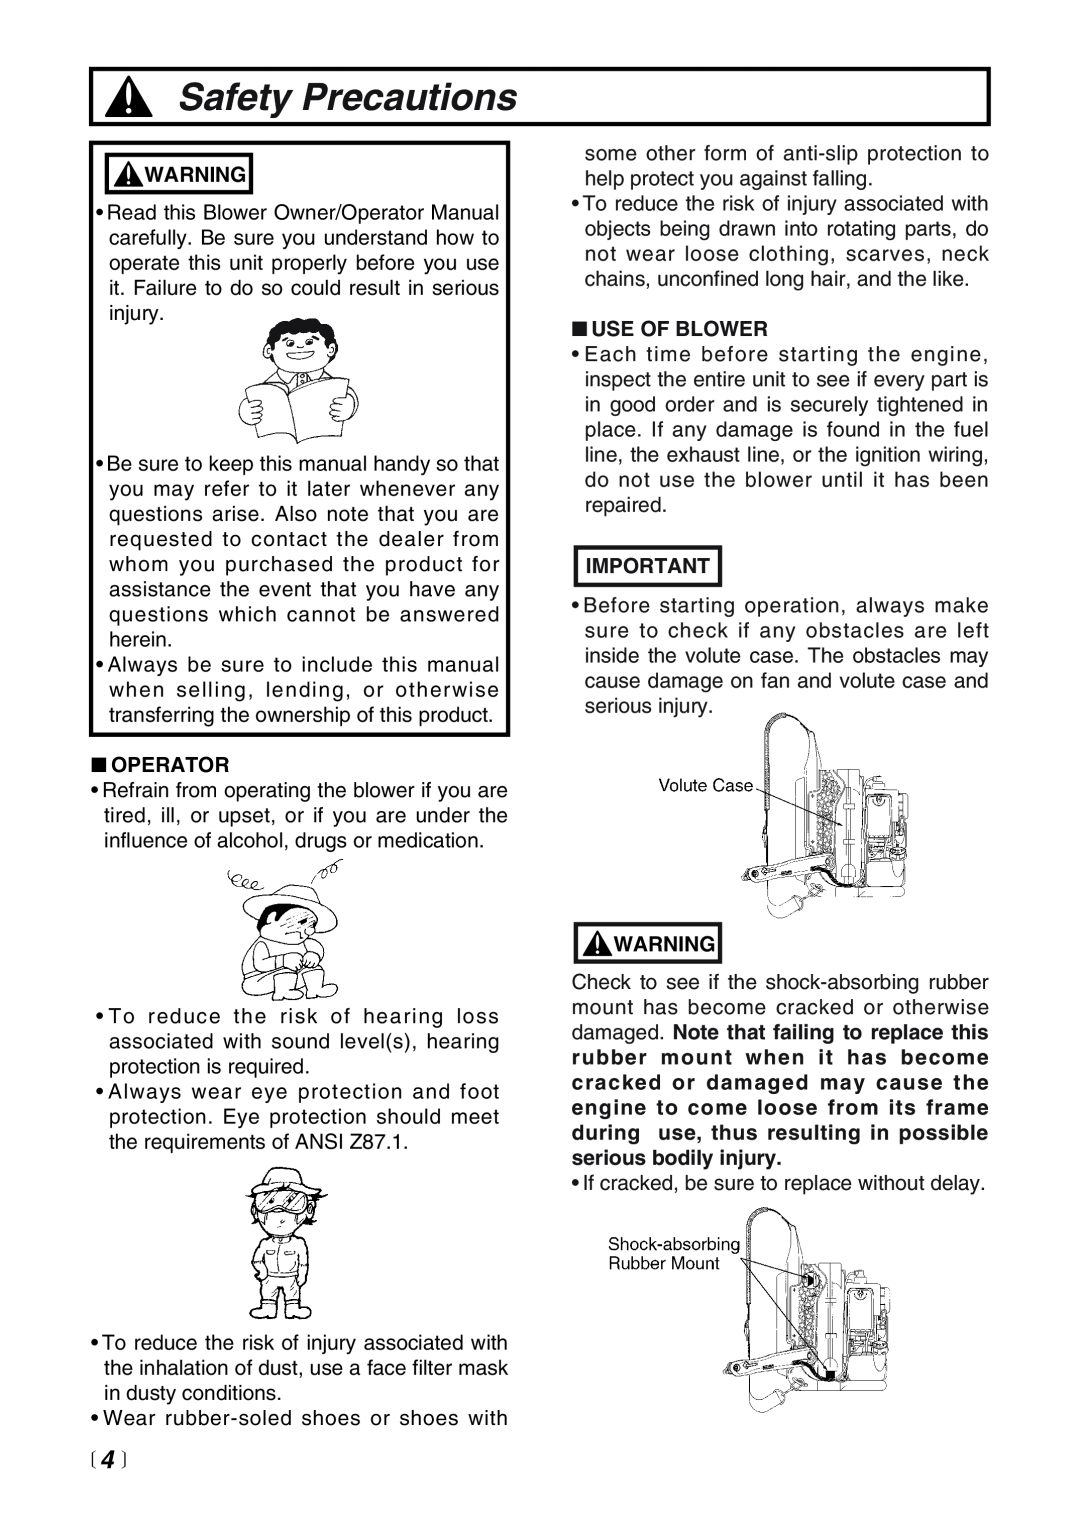 RedMax EB4401 manual Safety Precautions, 4 , Operator, Use Of Blower 